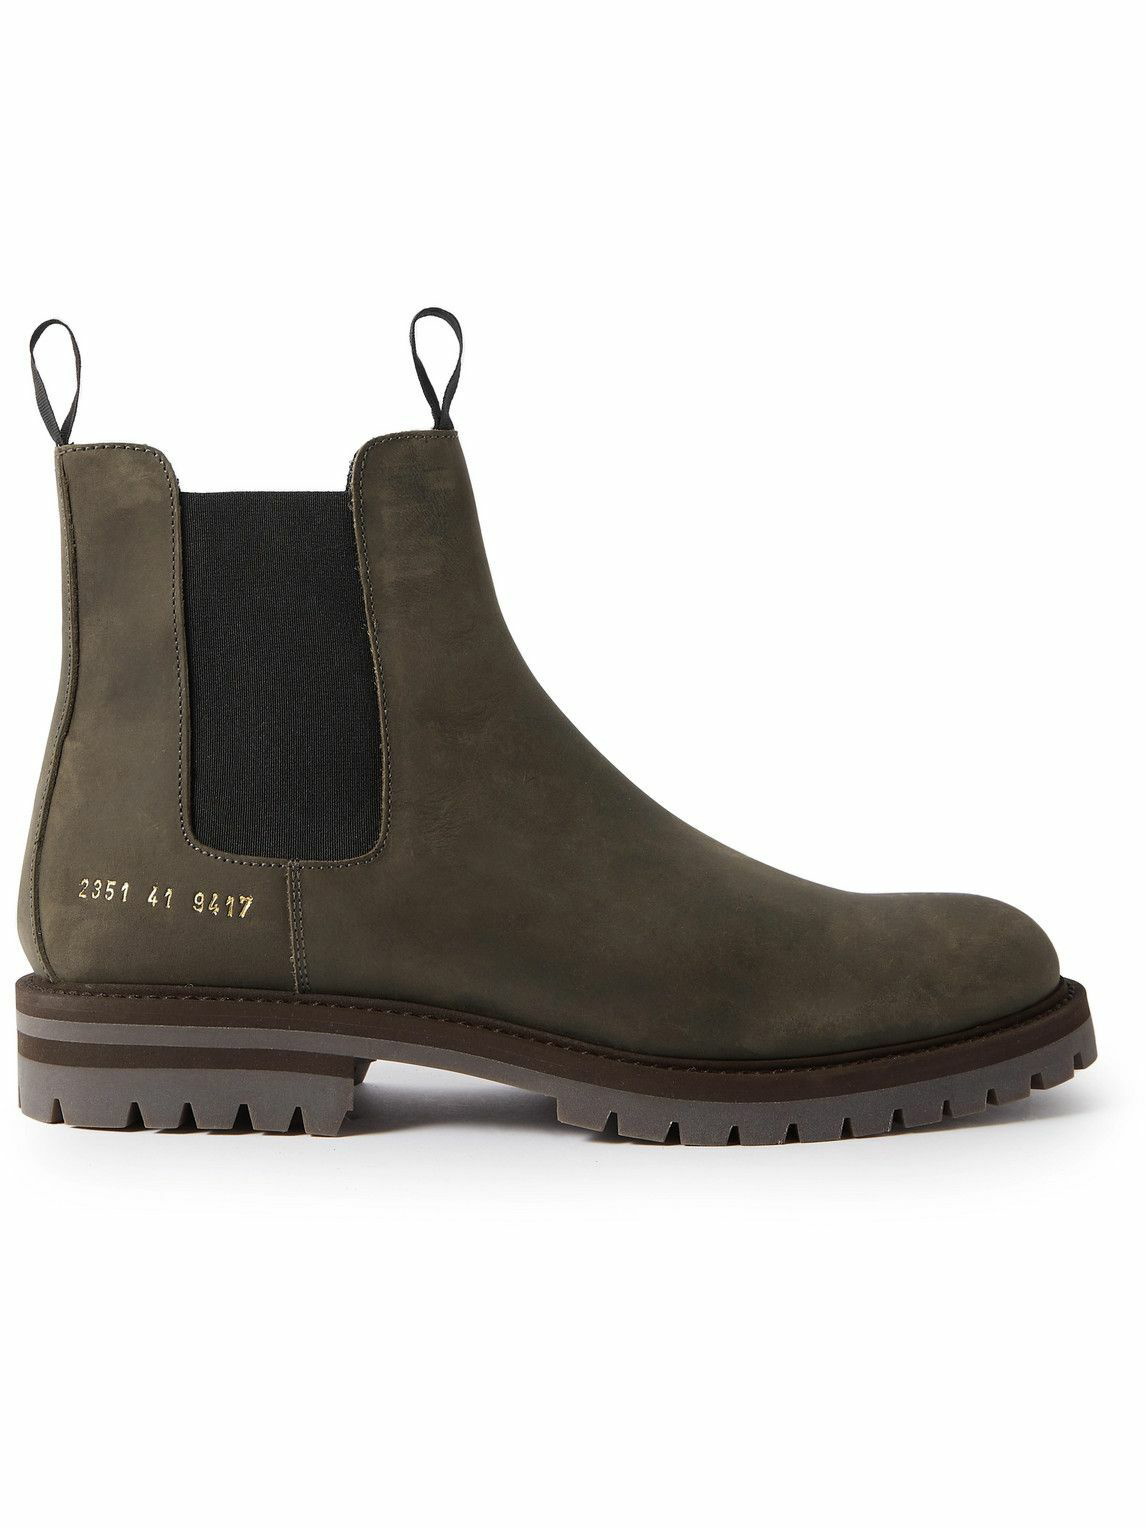 Projects - Suede Chelsea Boots - Projects